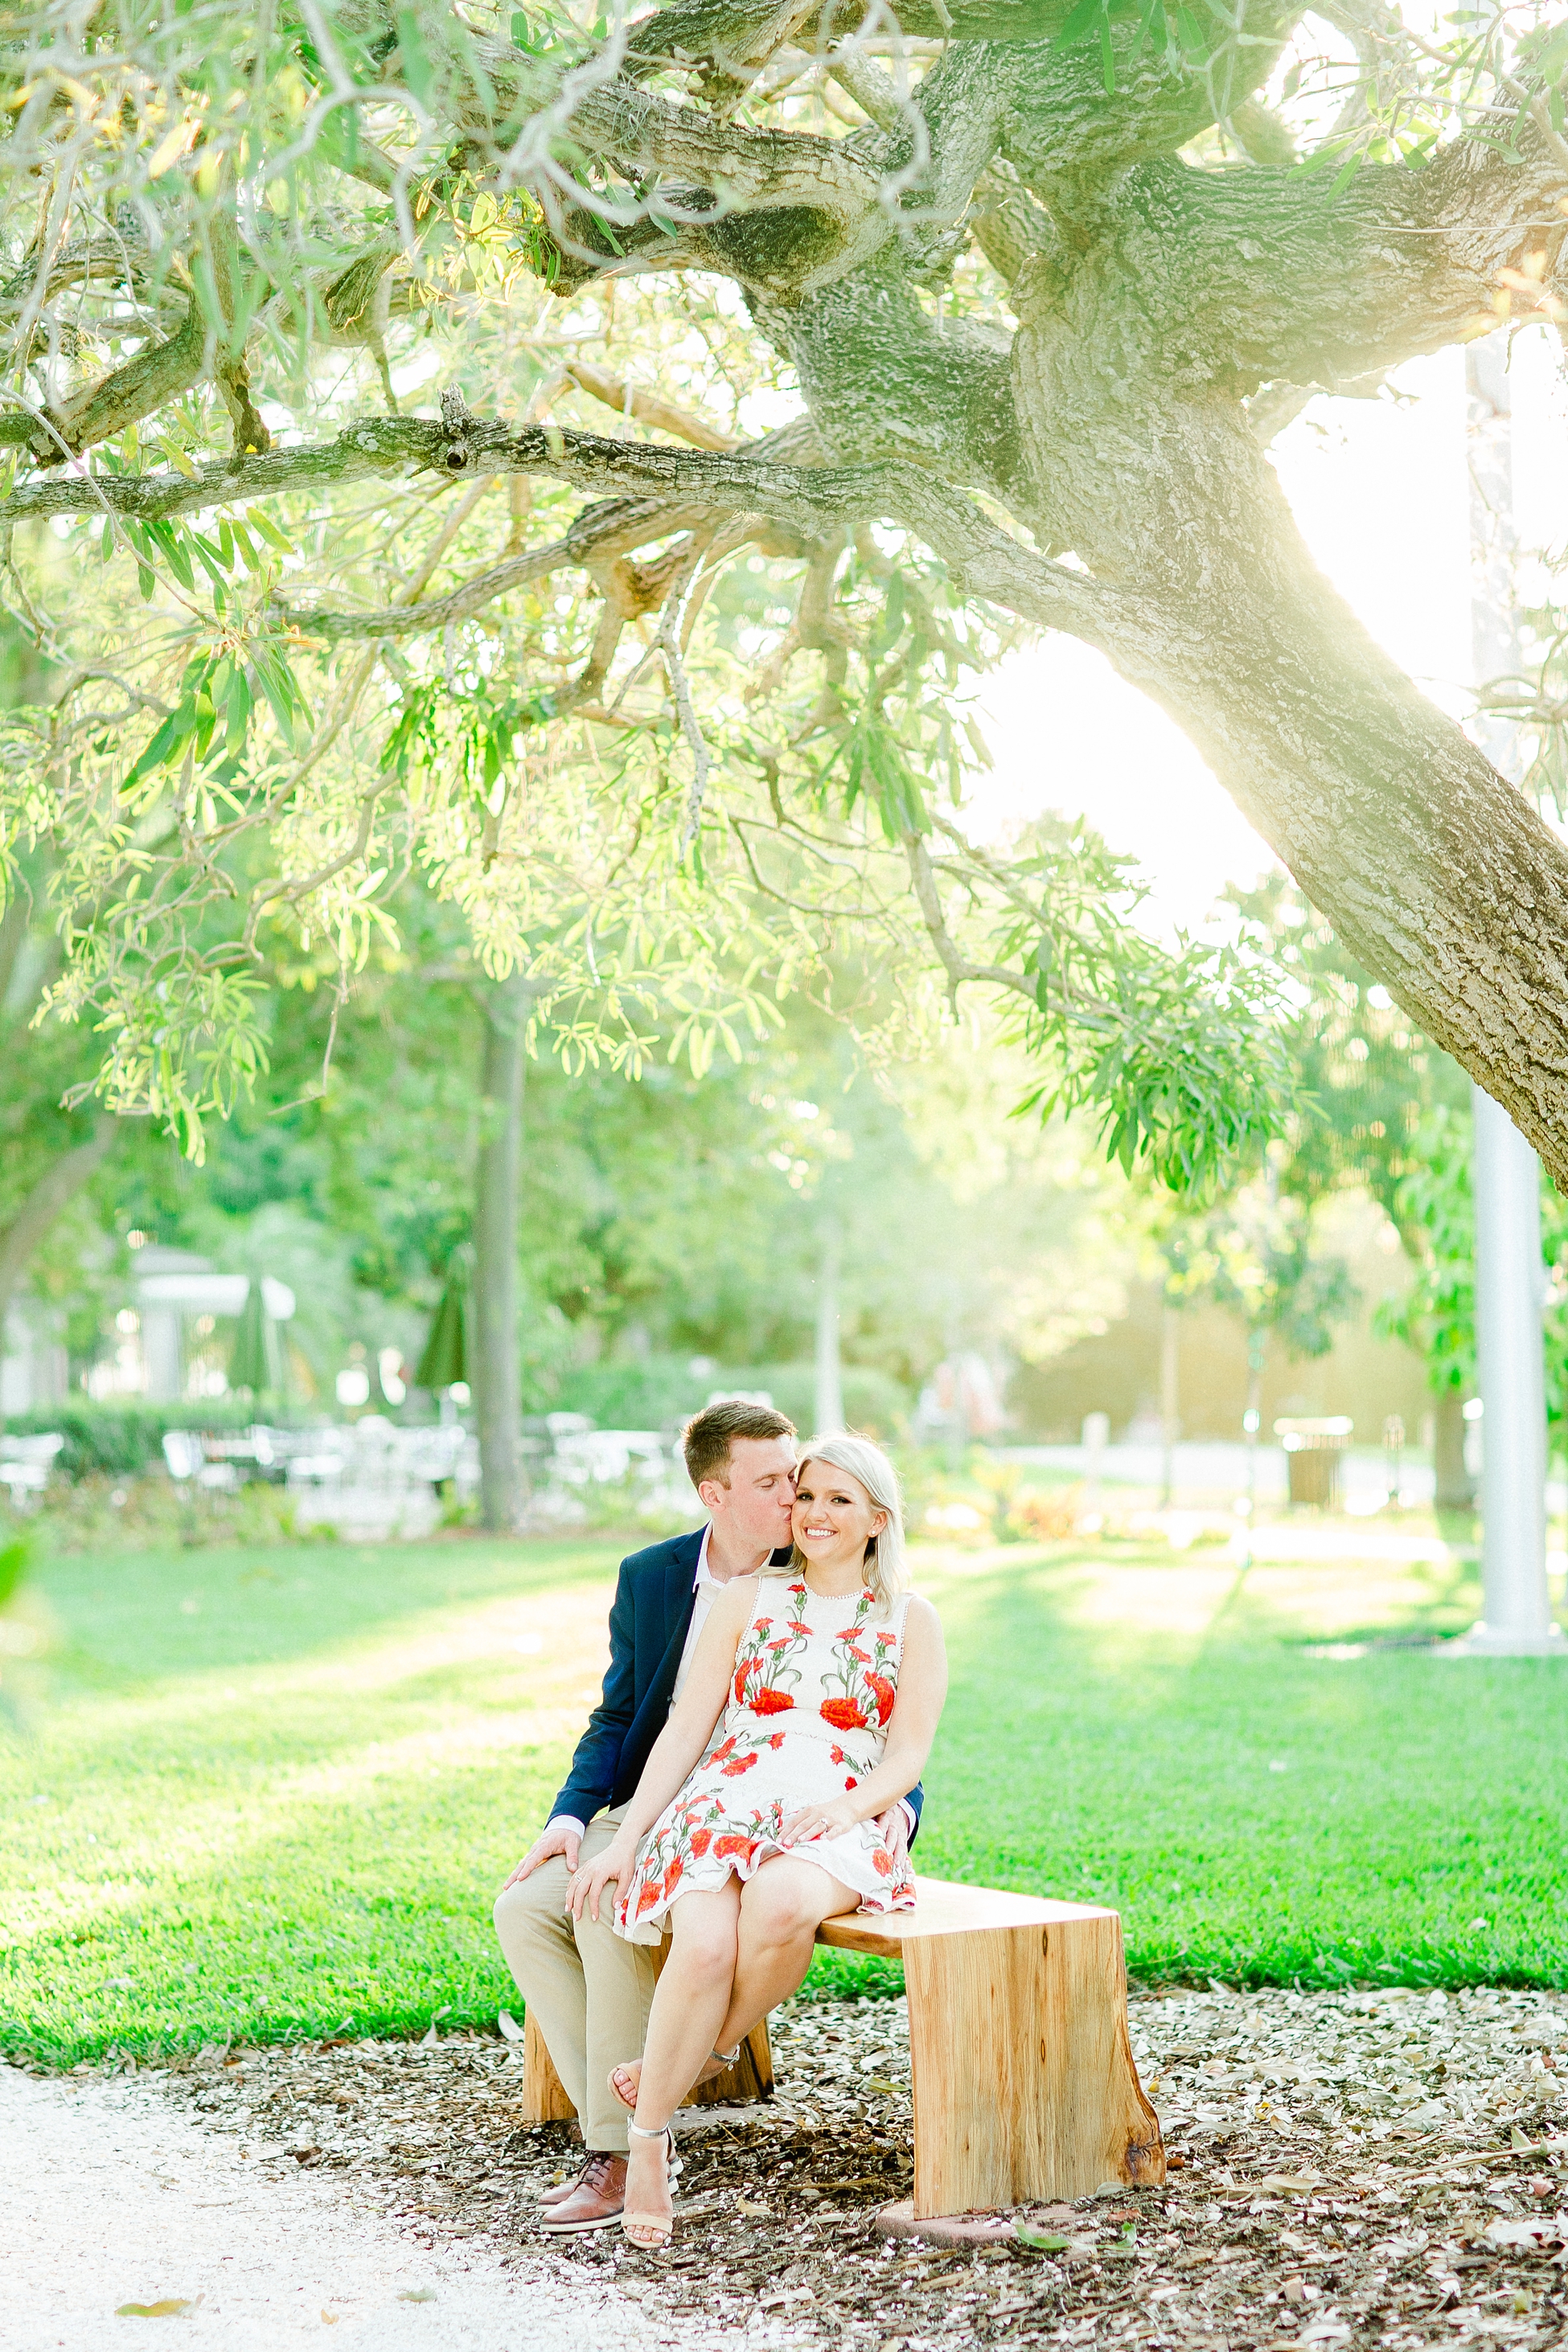 Ringling Museum Engagement | © Ailyn La Torre Photography 2019